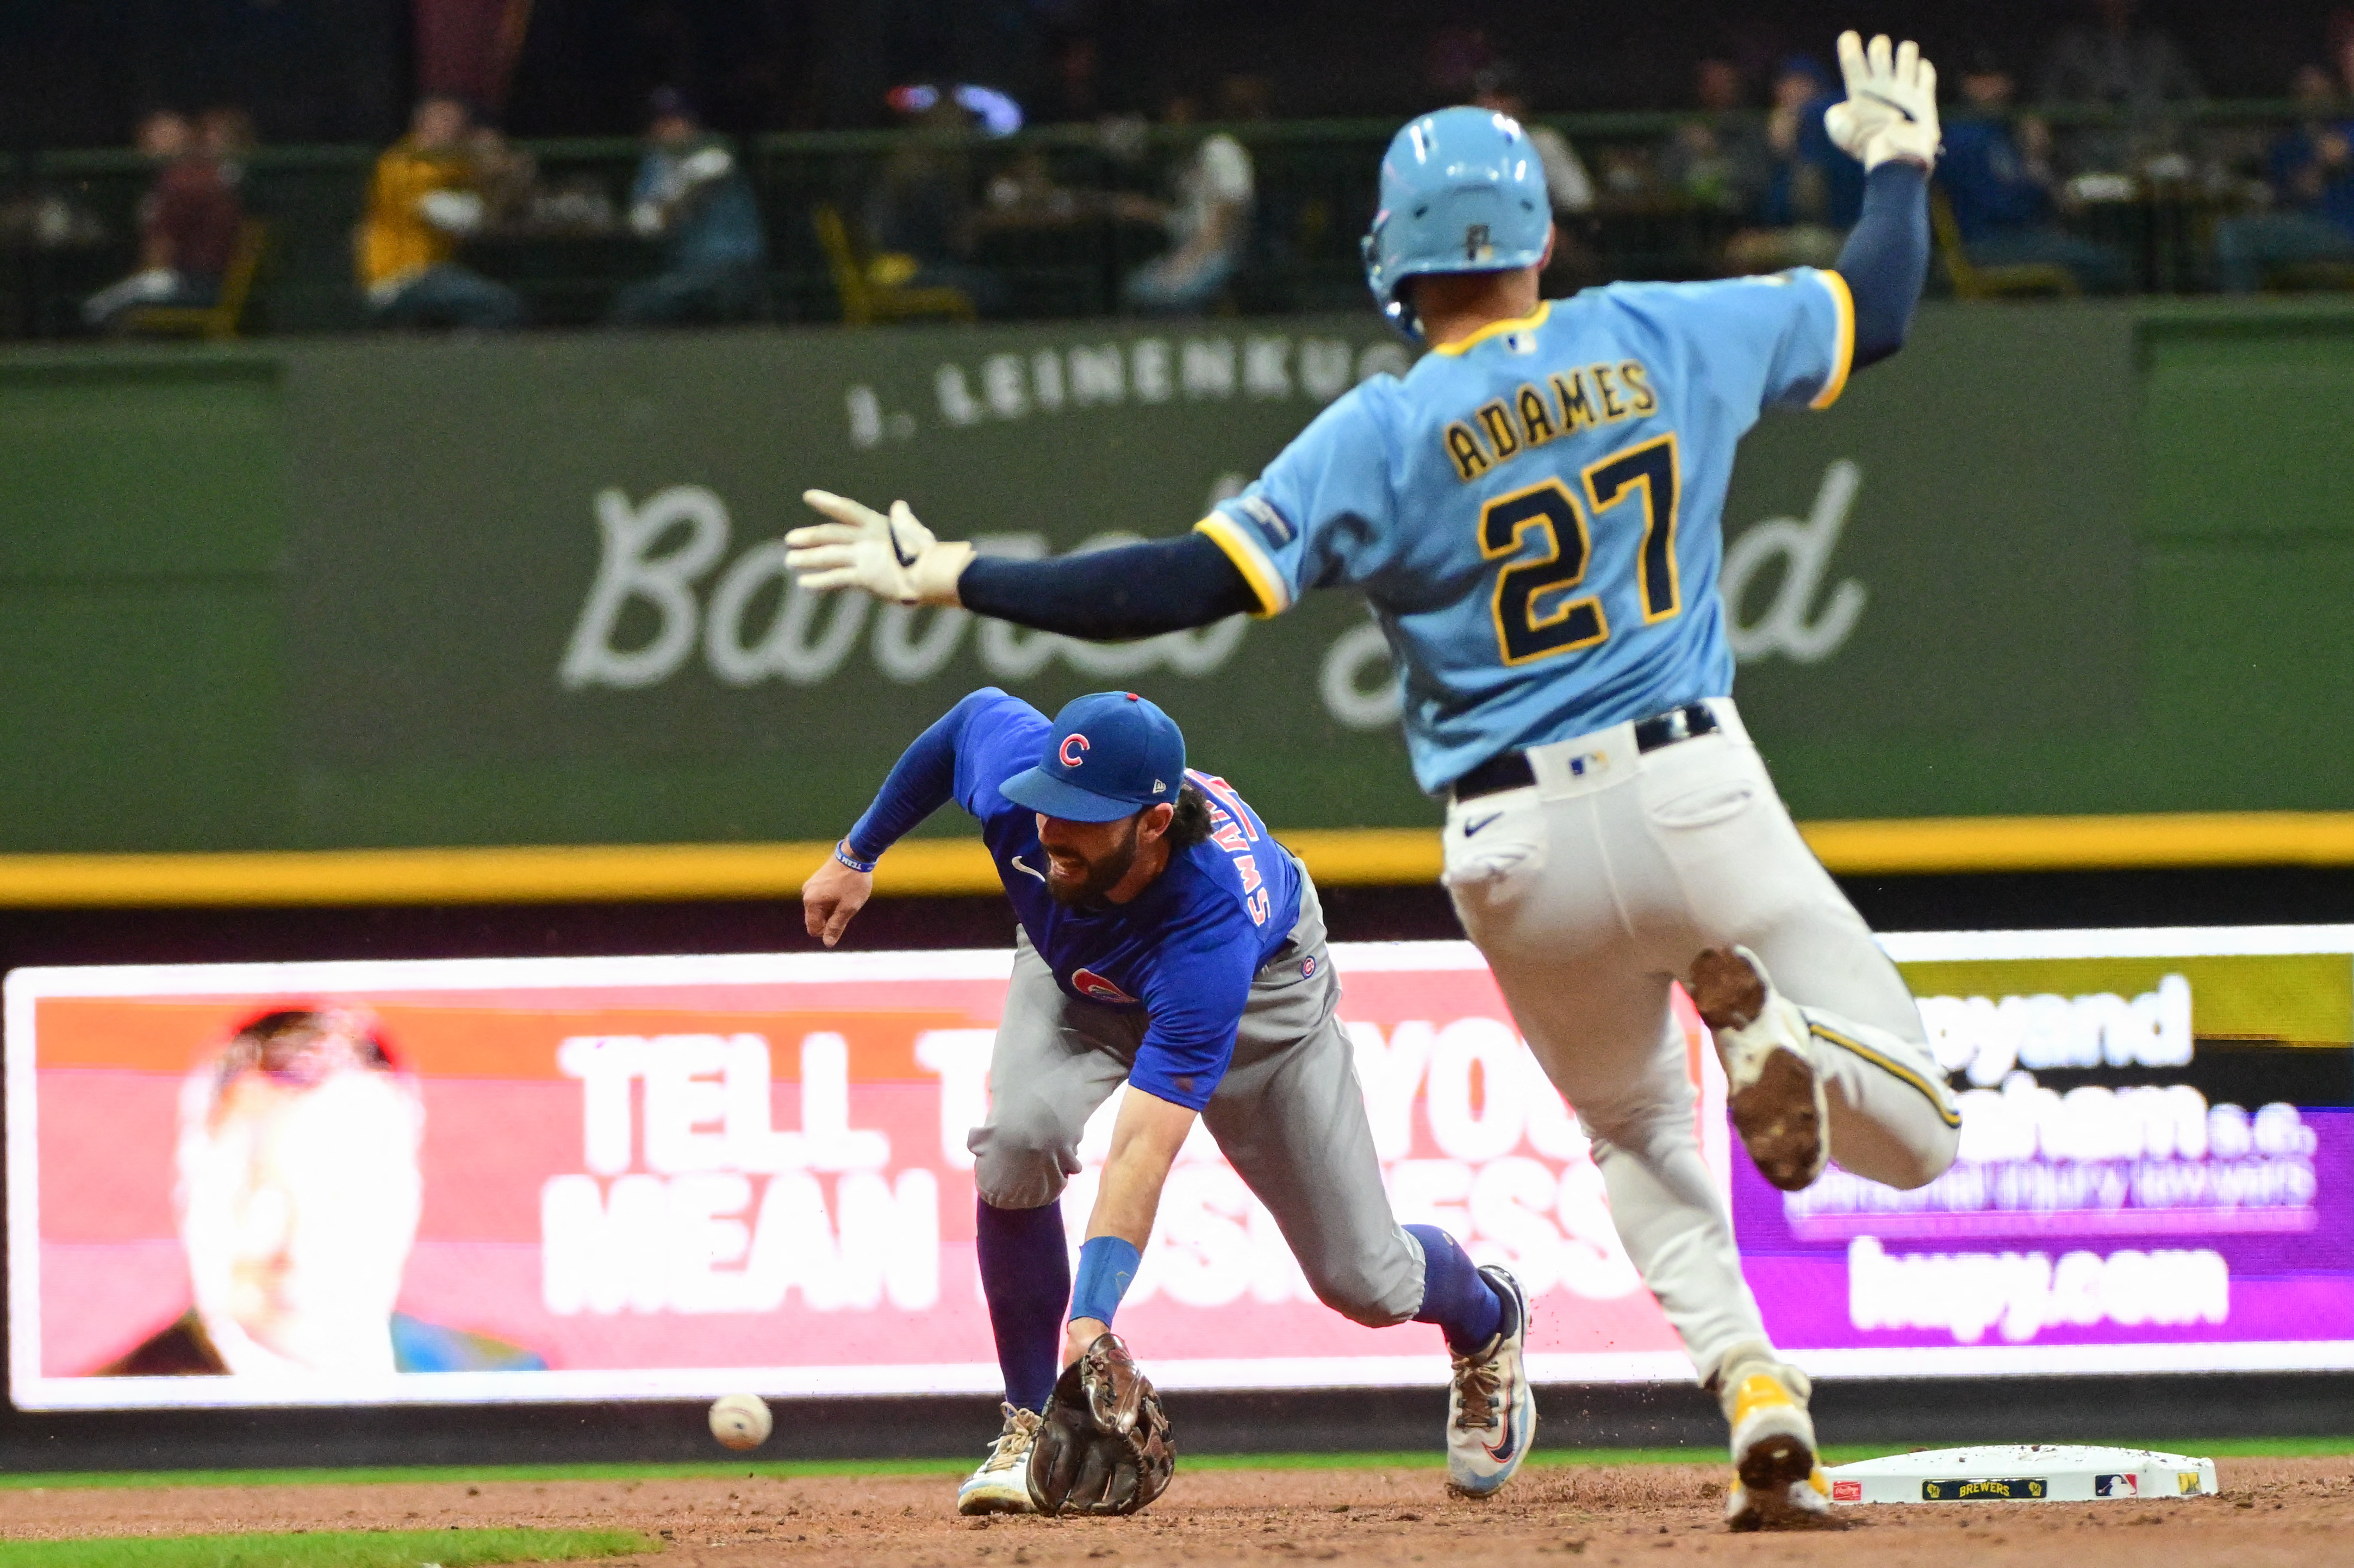 Cubs' postseason hopes take hit in 10-inning loss to Brewers